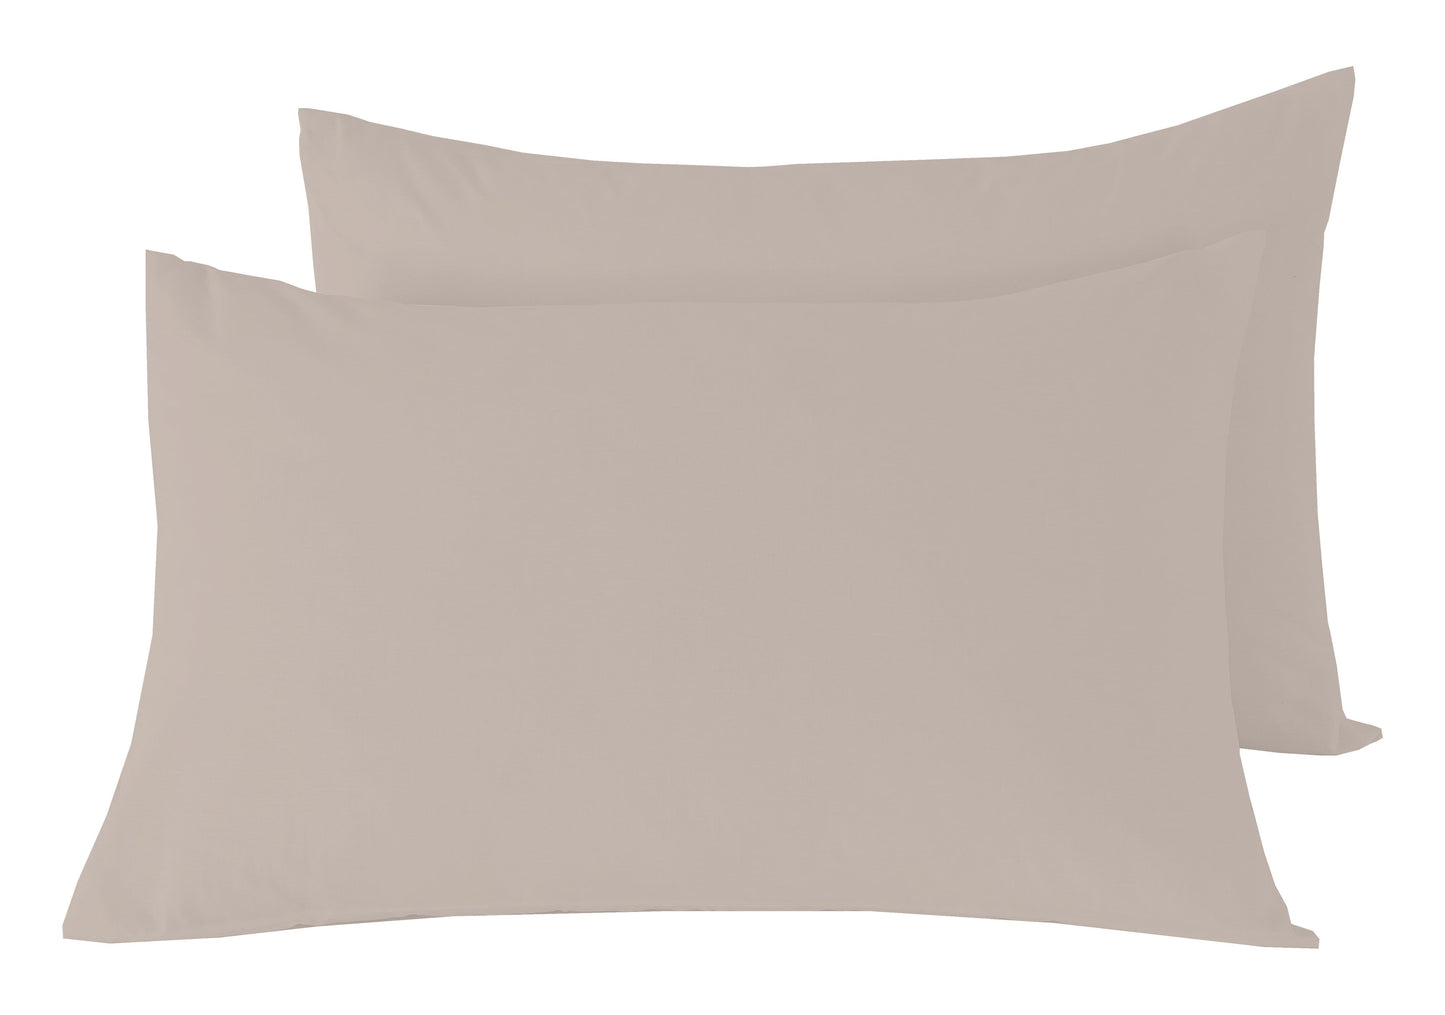 Basics Fitted Sheet PILLOWCASES / NATURAL OLIVIA ROCCO basics Fitted Sheet